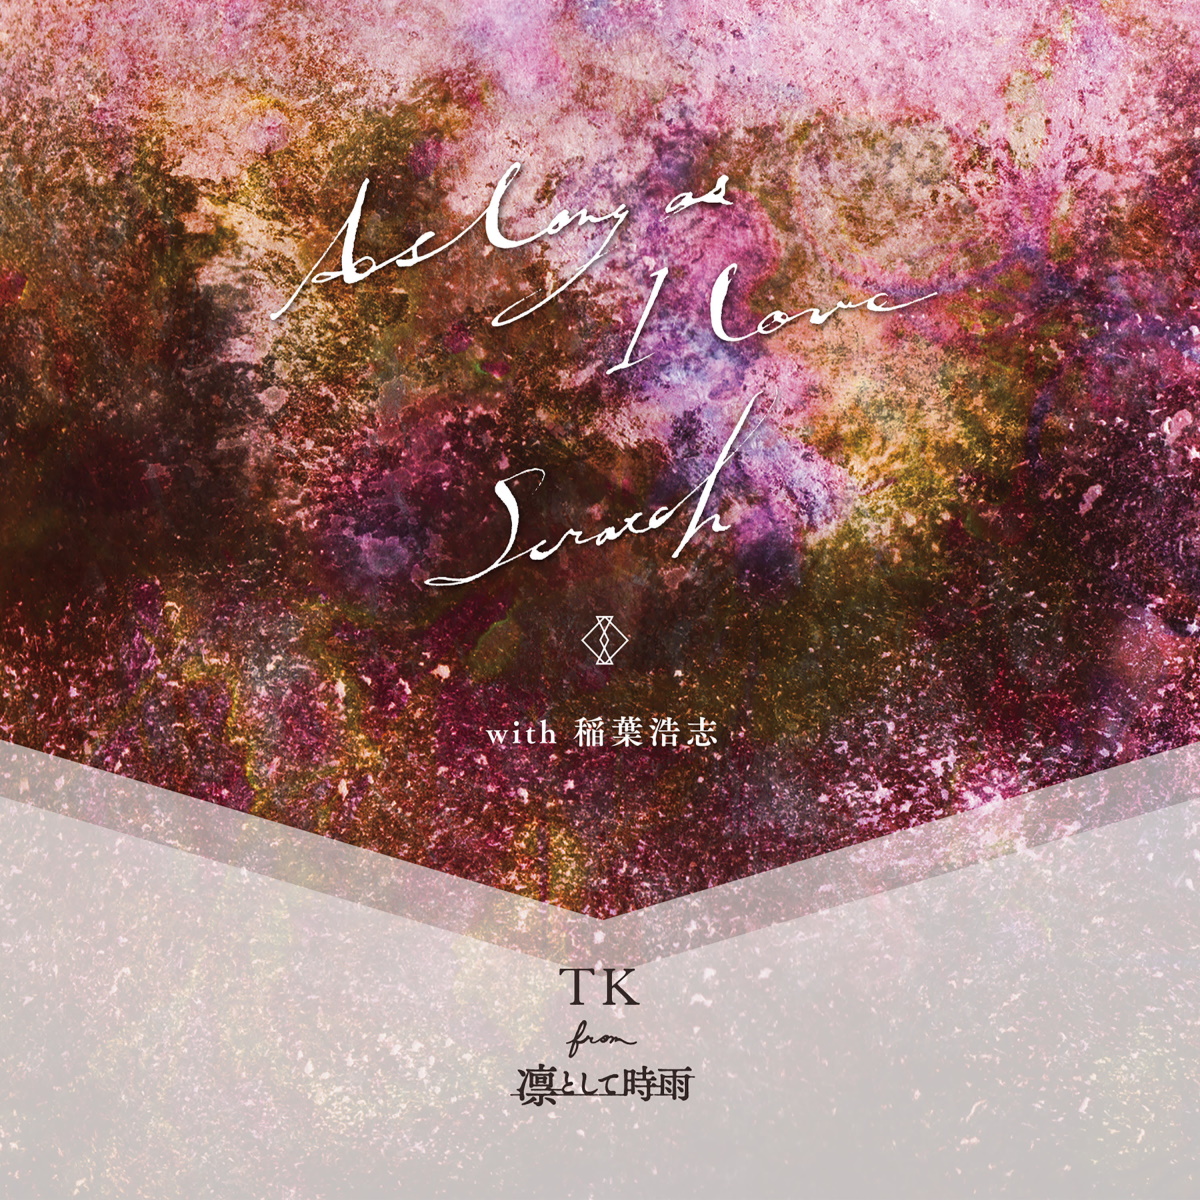 『TK from 凛として時雨 - As long as I love (with 稲葉浩志)』収録の『As long as I love / Scratch (with 稲葉浩志)』ジャケット